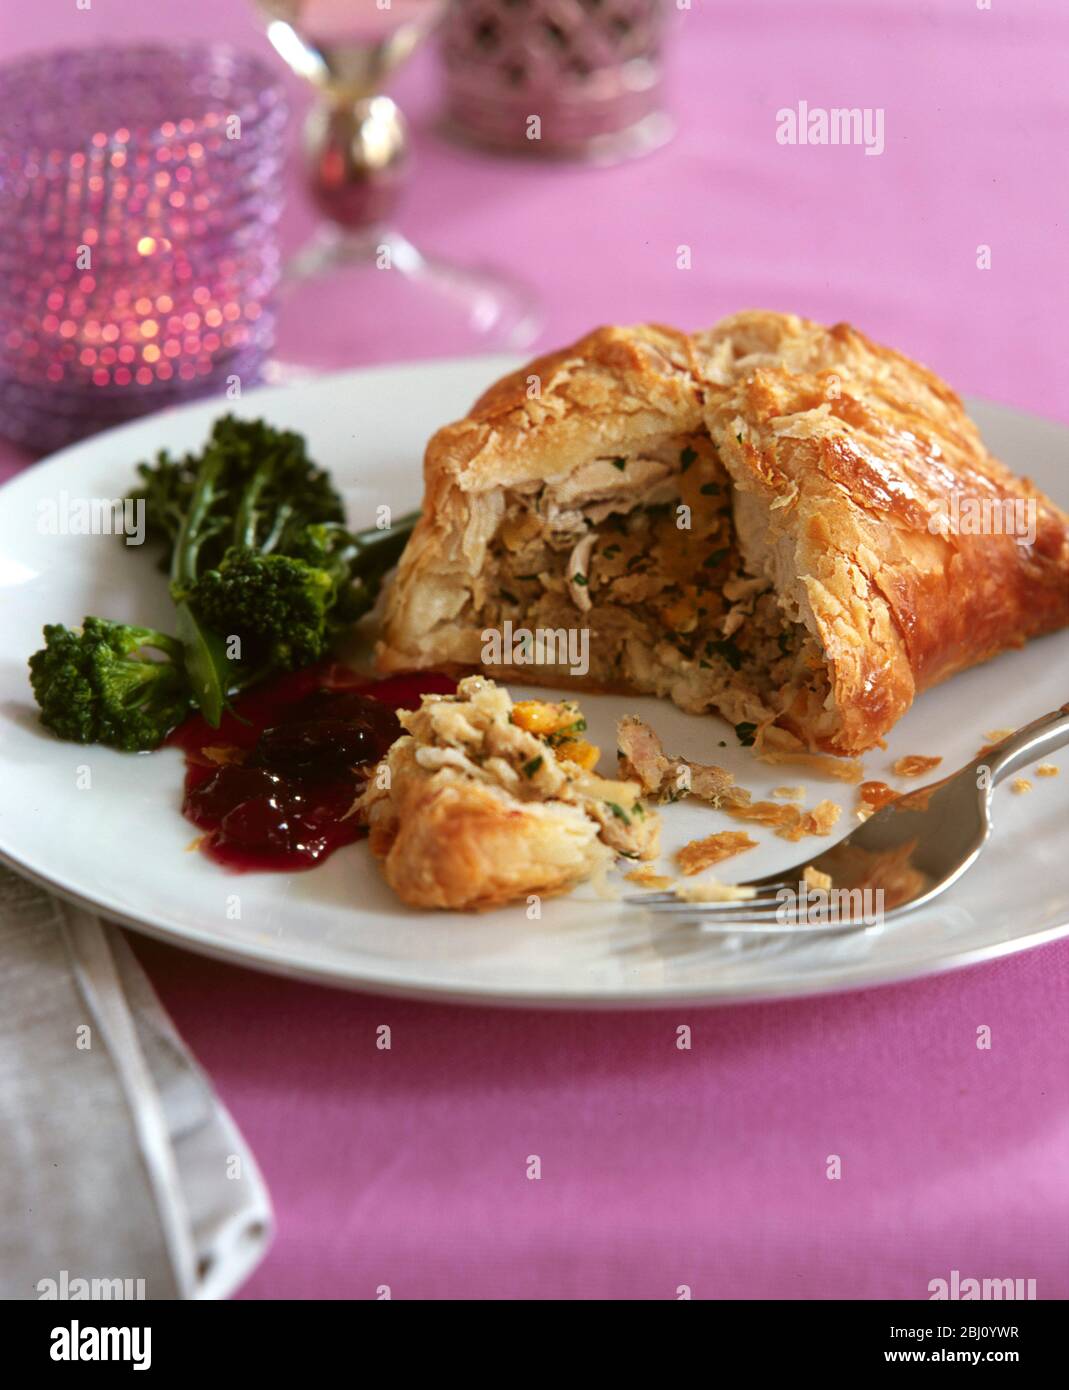 Turkey baked en croute with broccolli and cranberry sauce in festive holiday/Christmas time setting - Stock Photo